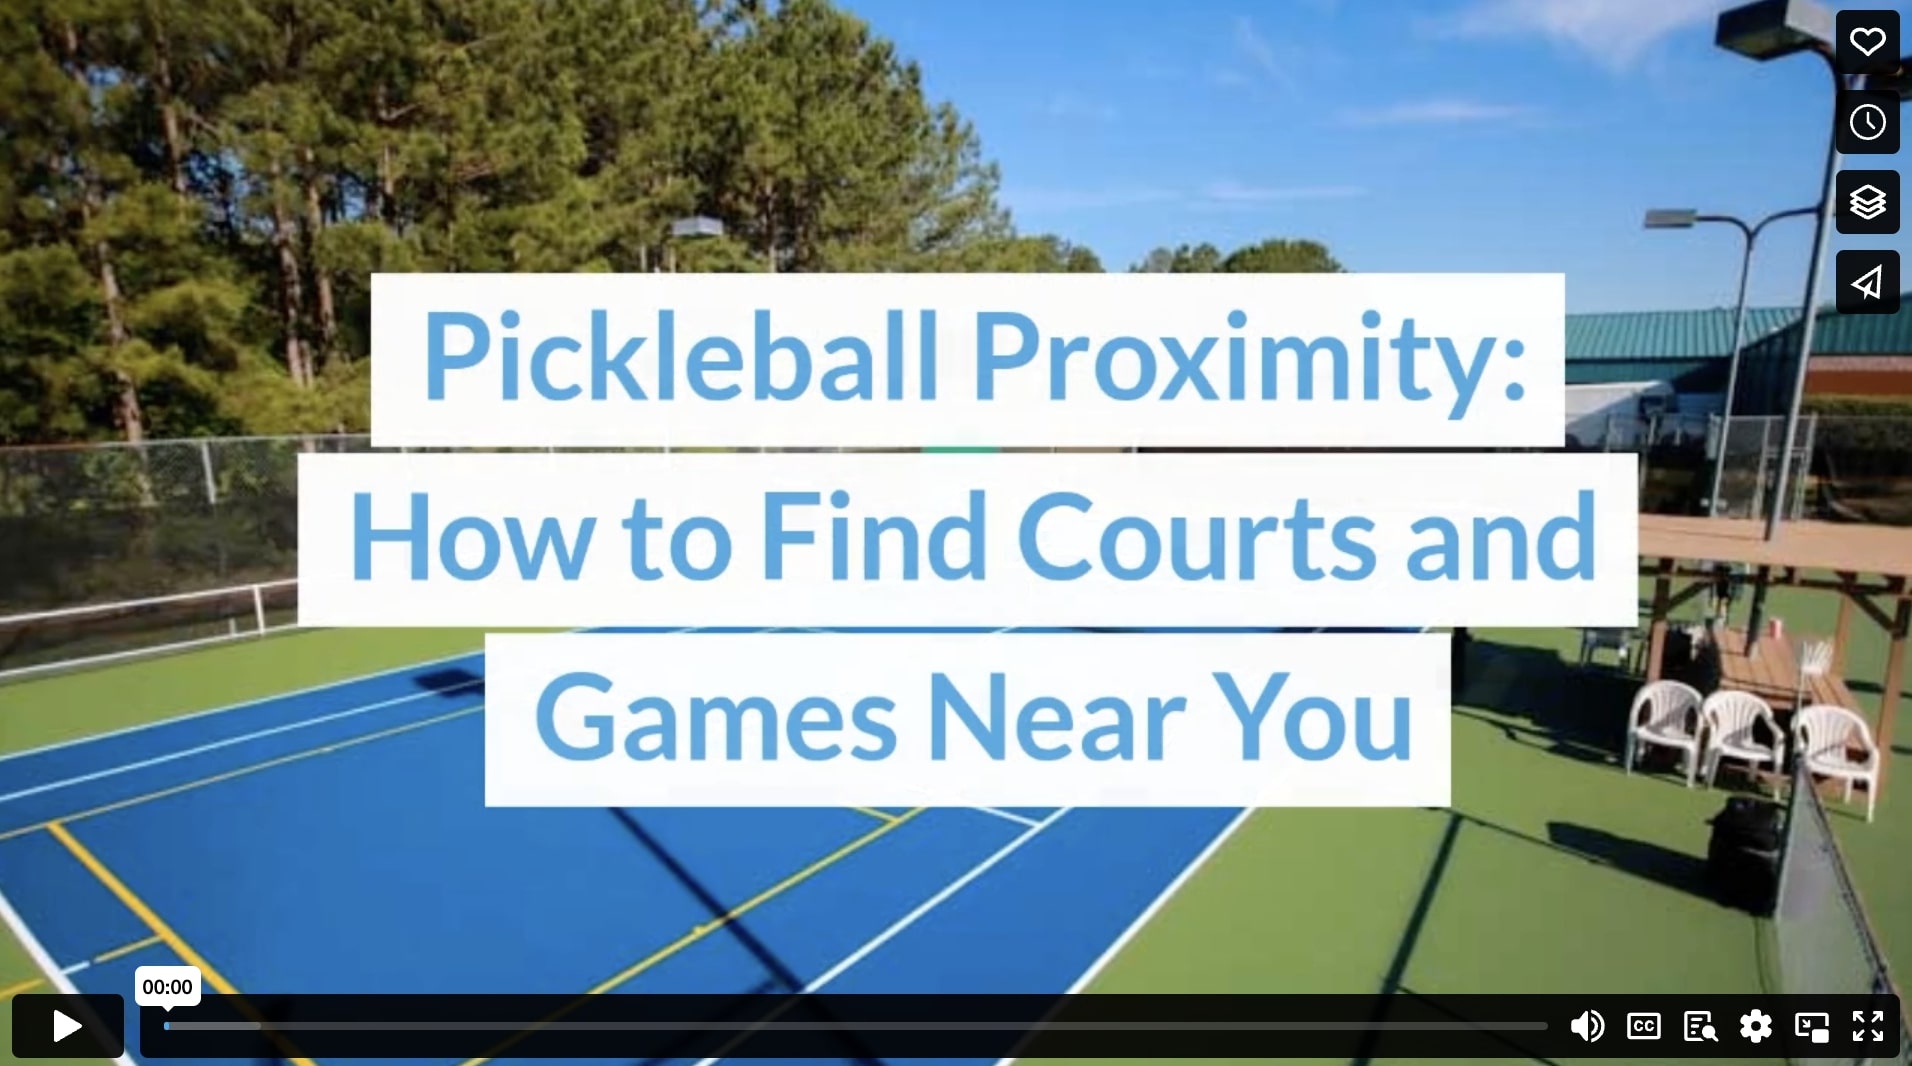 Pickleball Proximity: How to Find Courts and Games Near You